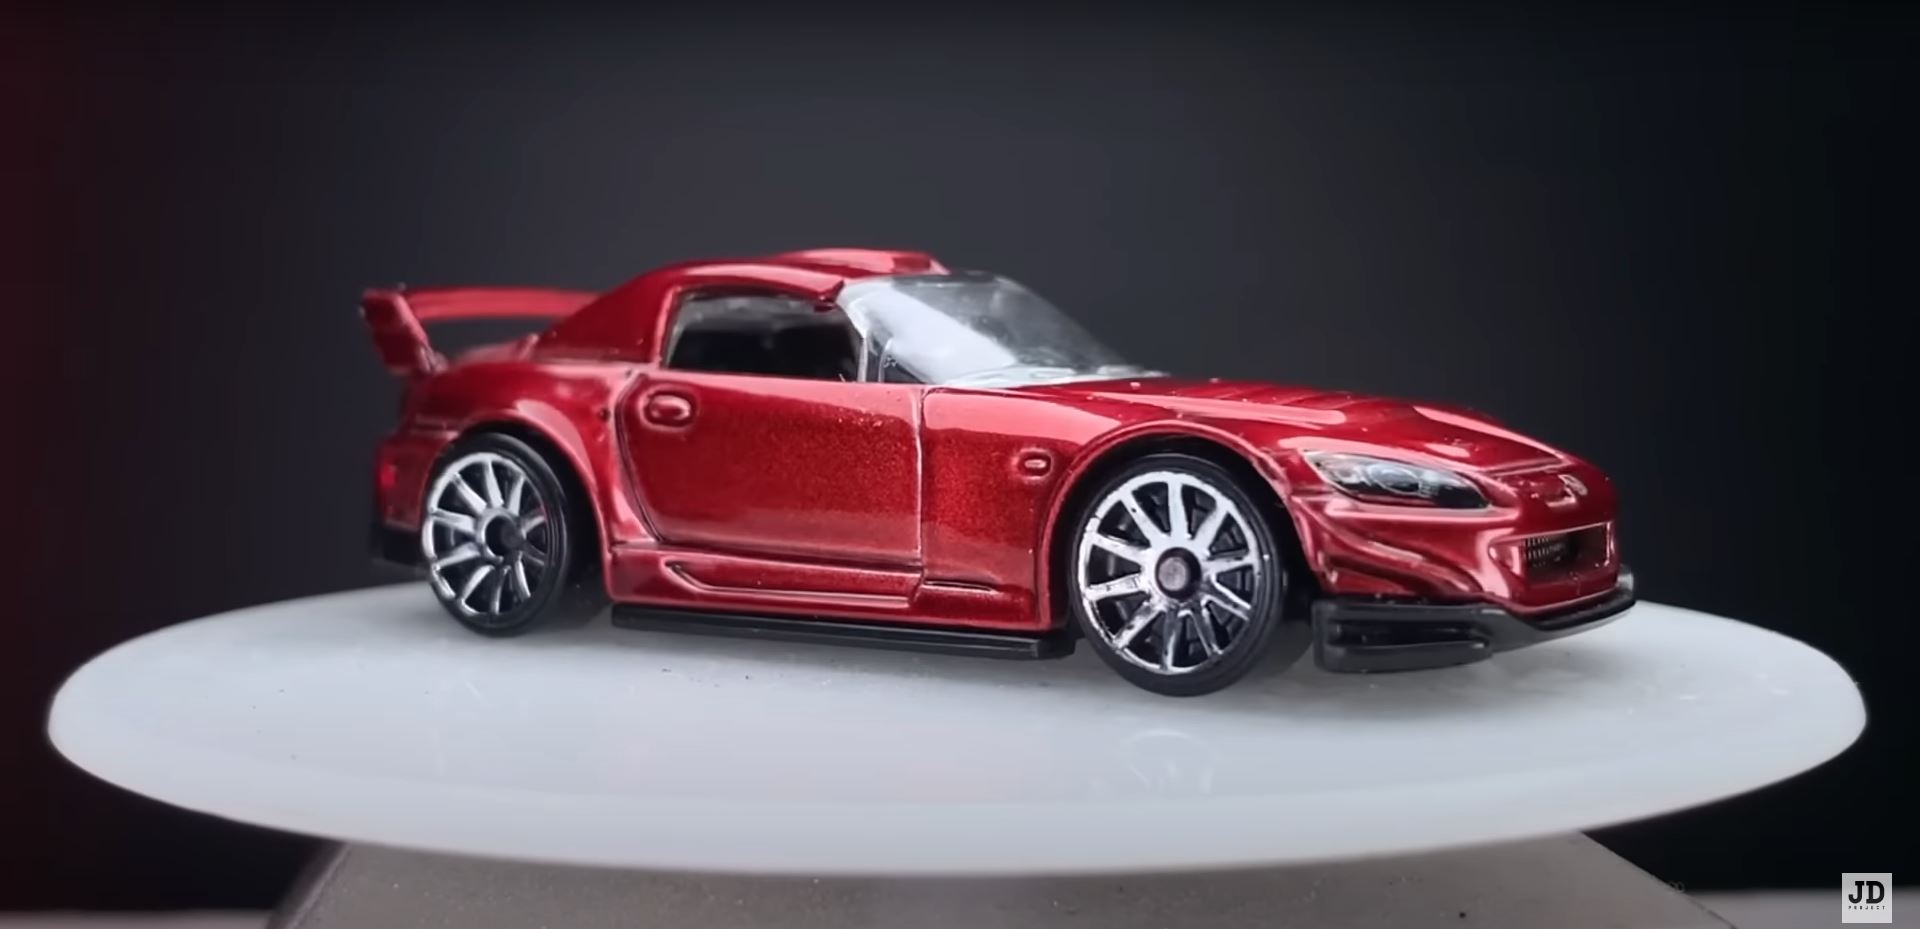 Honda S2000 Goes From Zero to Hero in 1/64-Scale Custom Project,  Hypnotizing to Watch - autoevolution